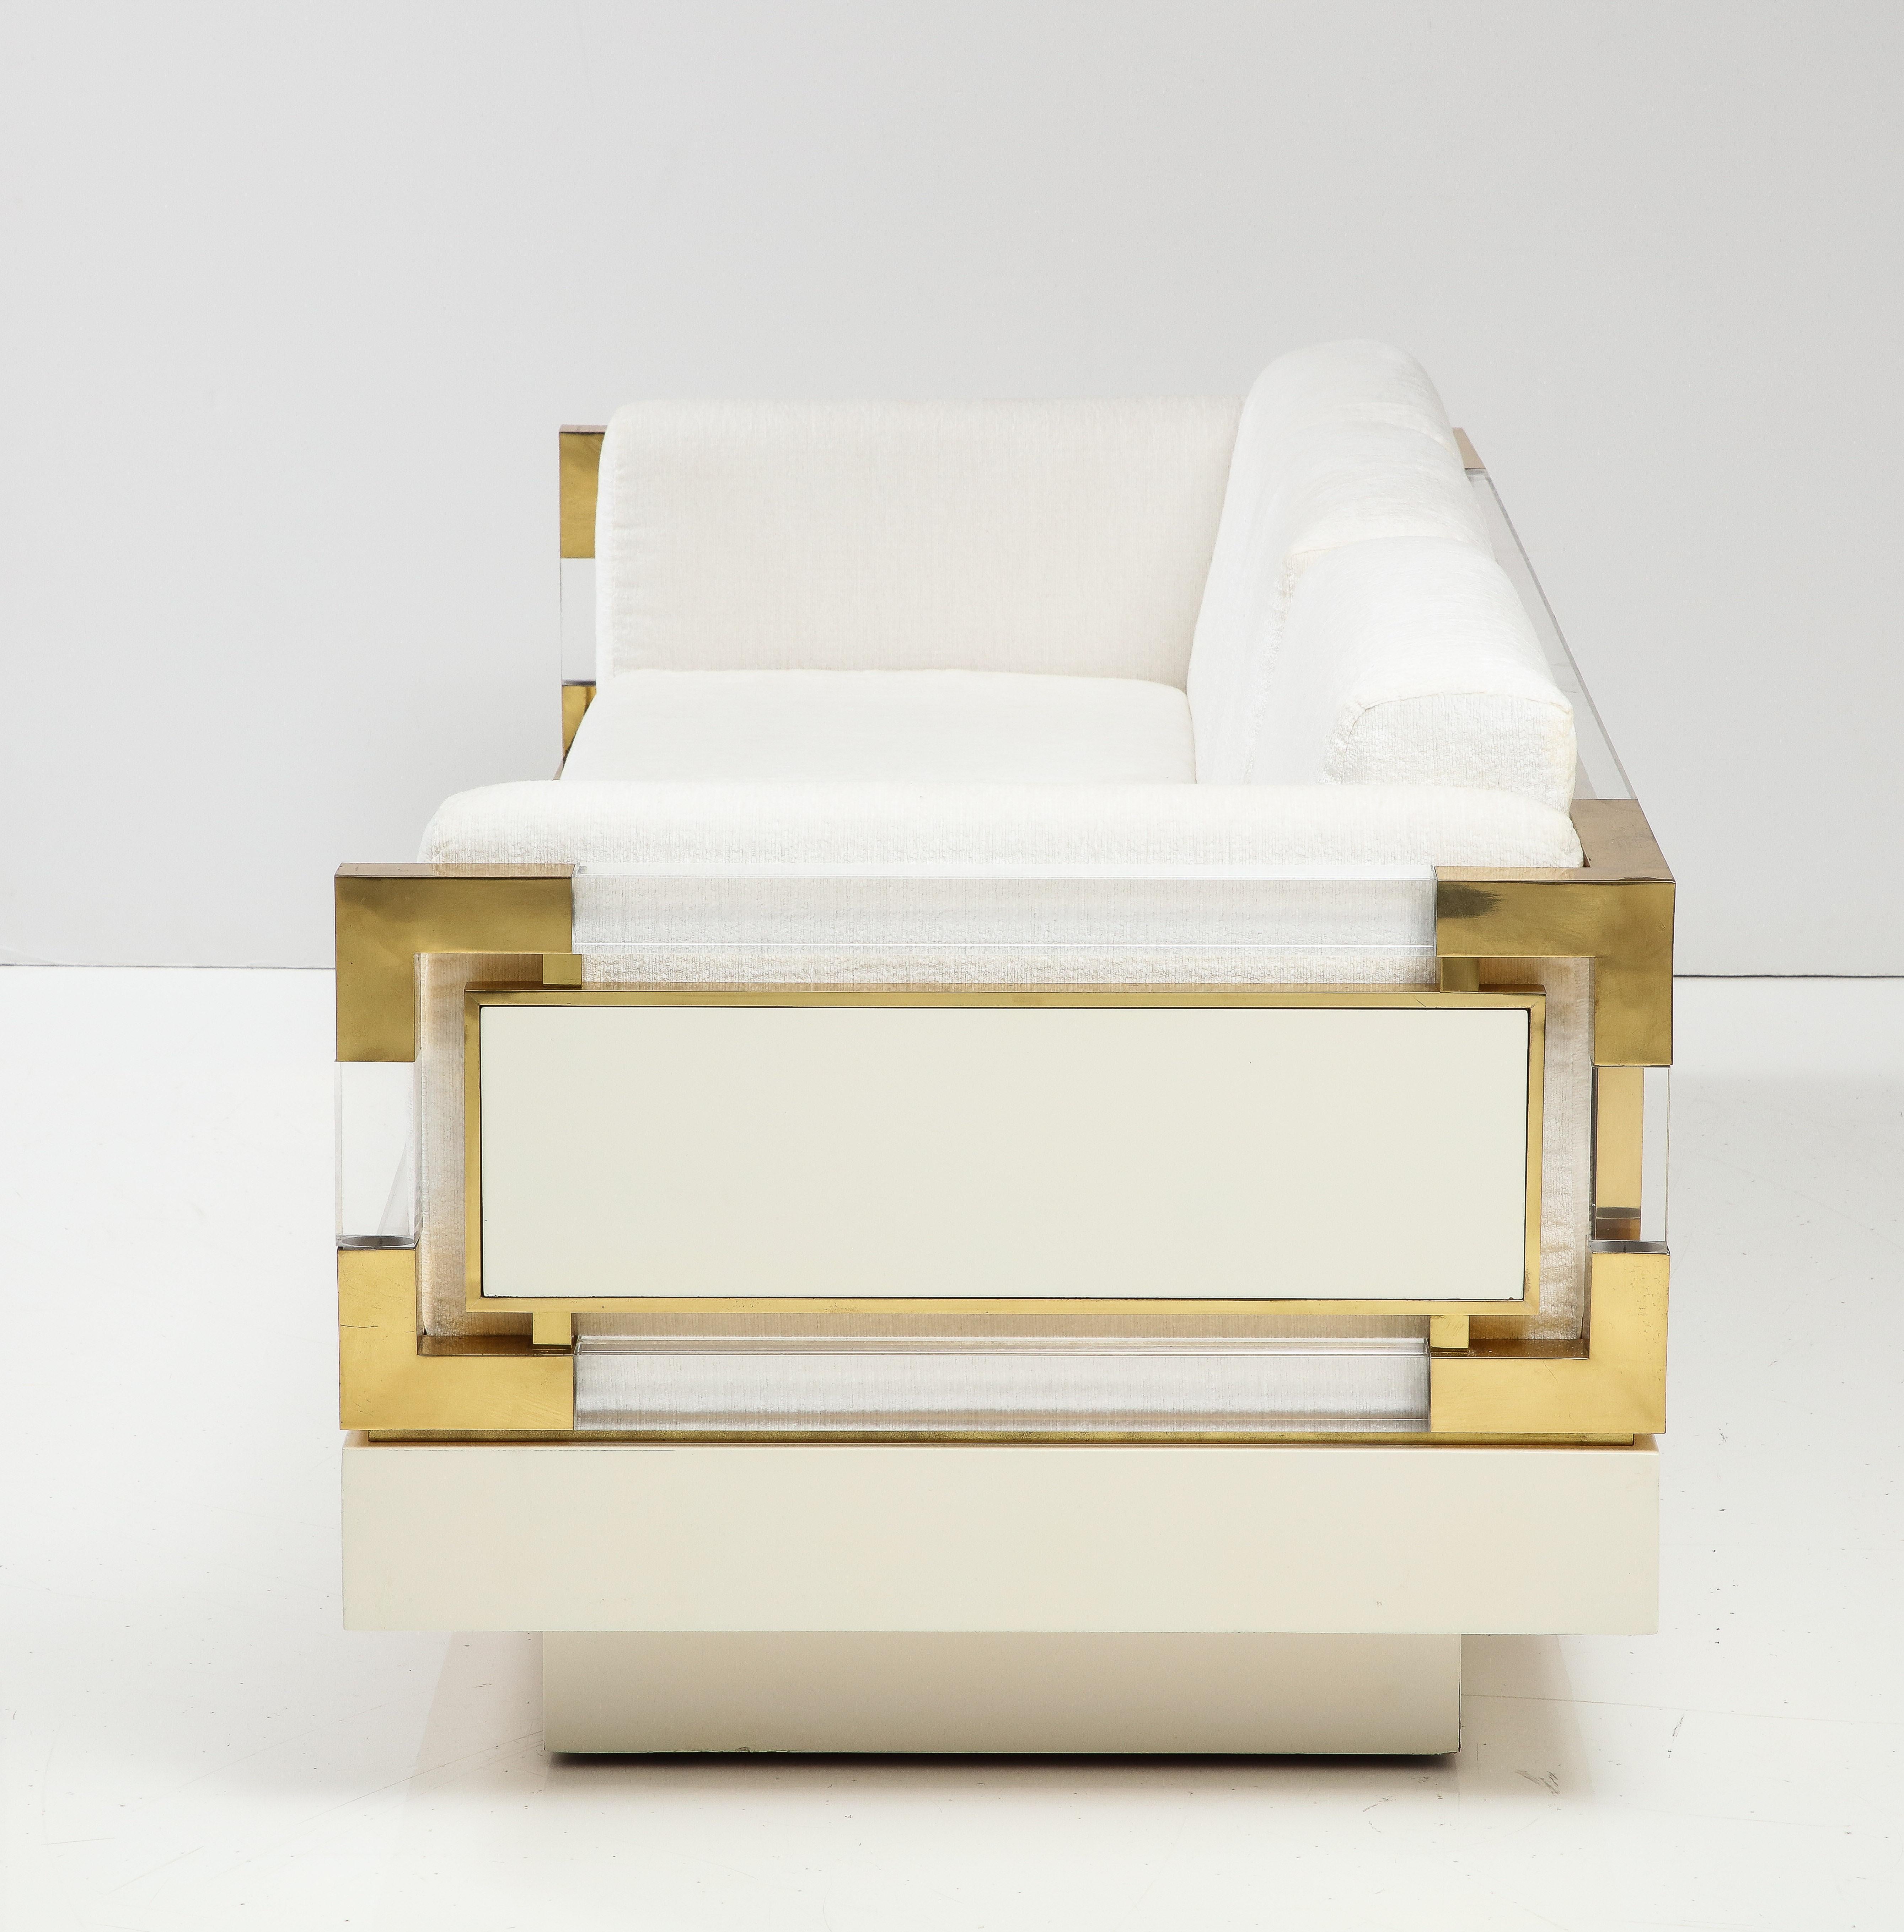 Rare Italian 1980's Lucite and Brass Sofa by Fabian In Good Condition For Sale In New York, NY